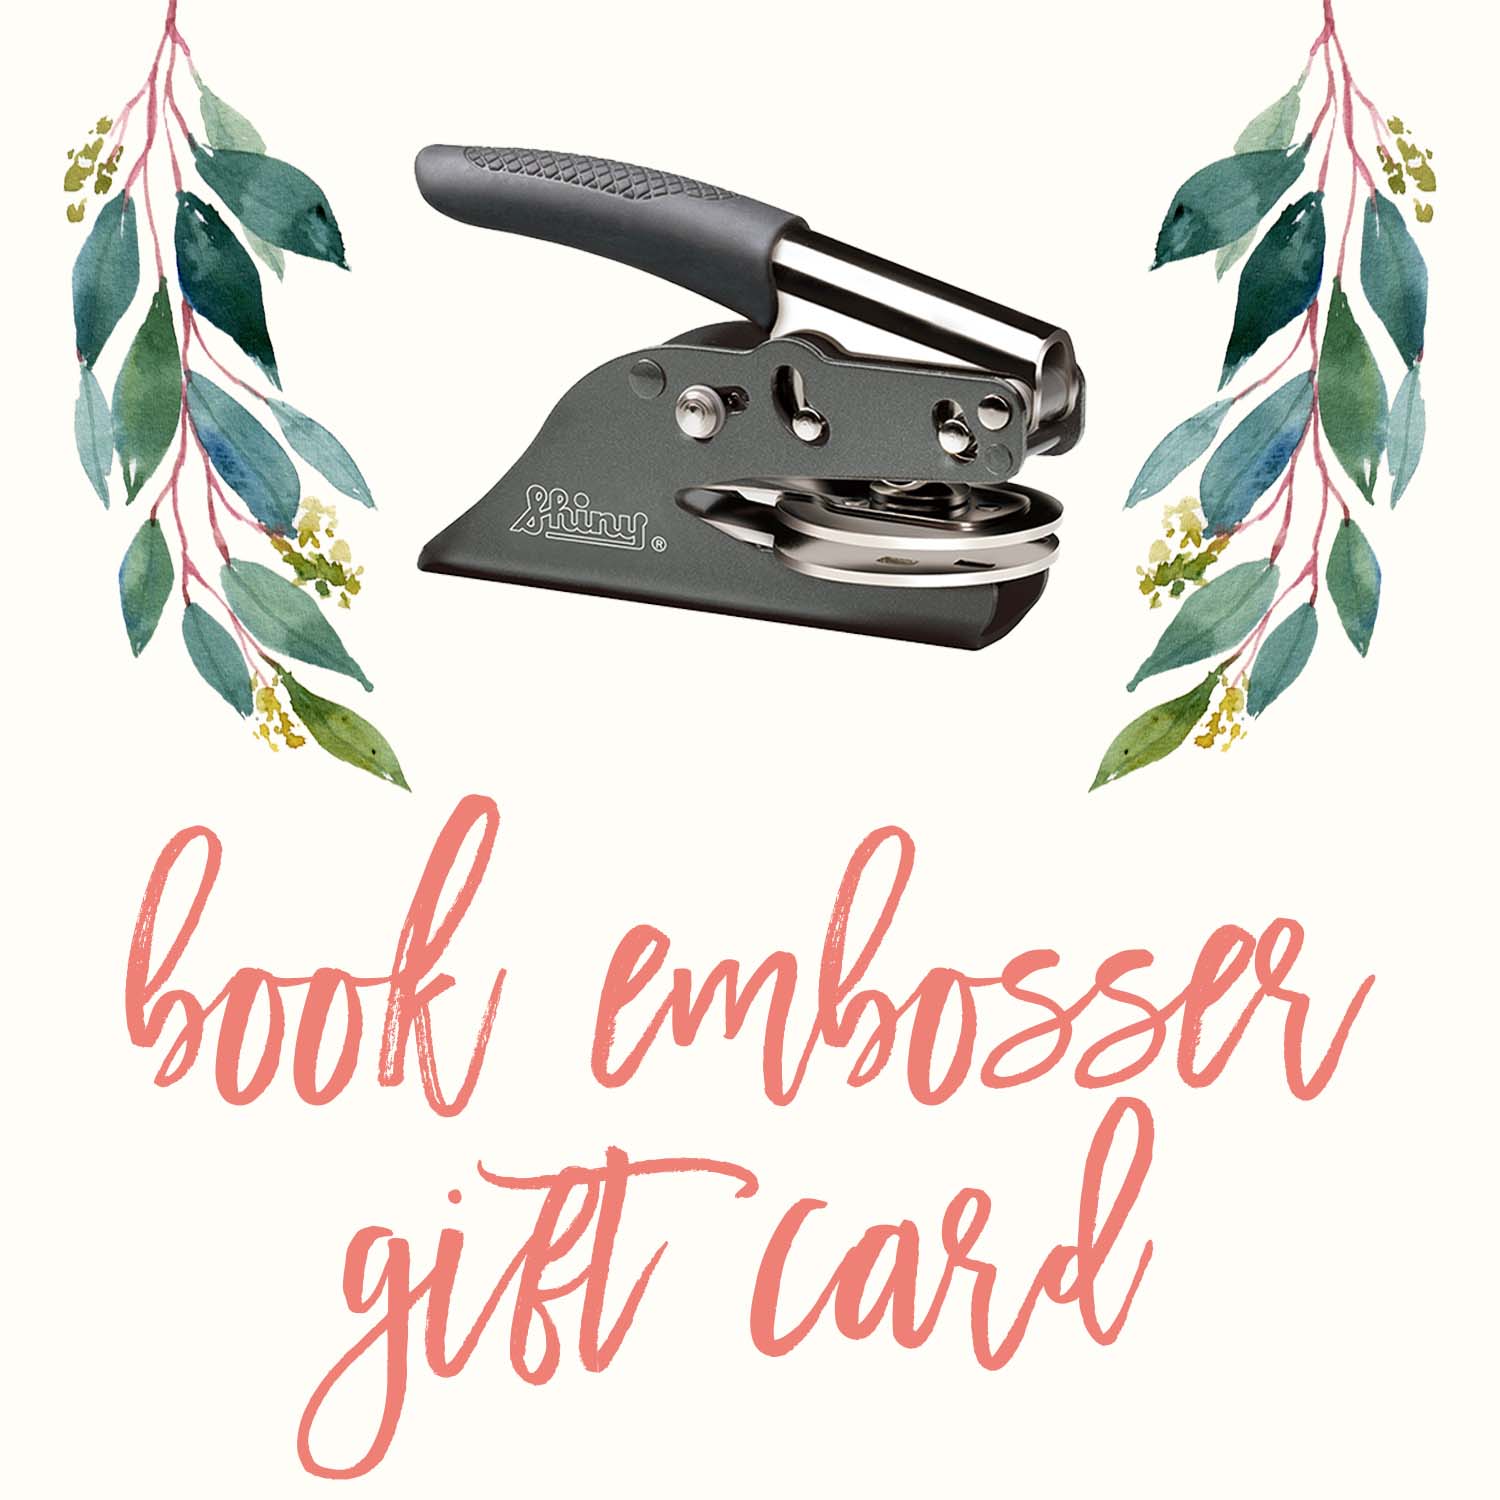  Custom Book Embosser, Personalized Gift from The